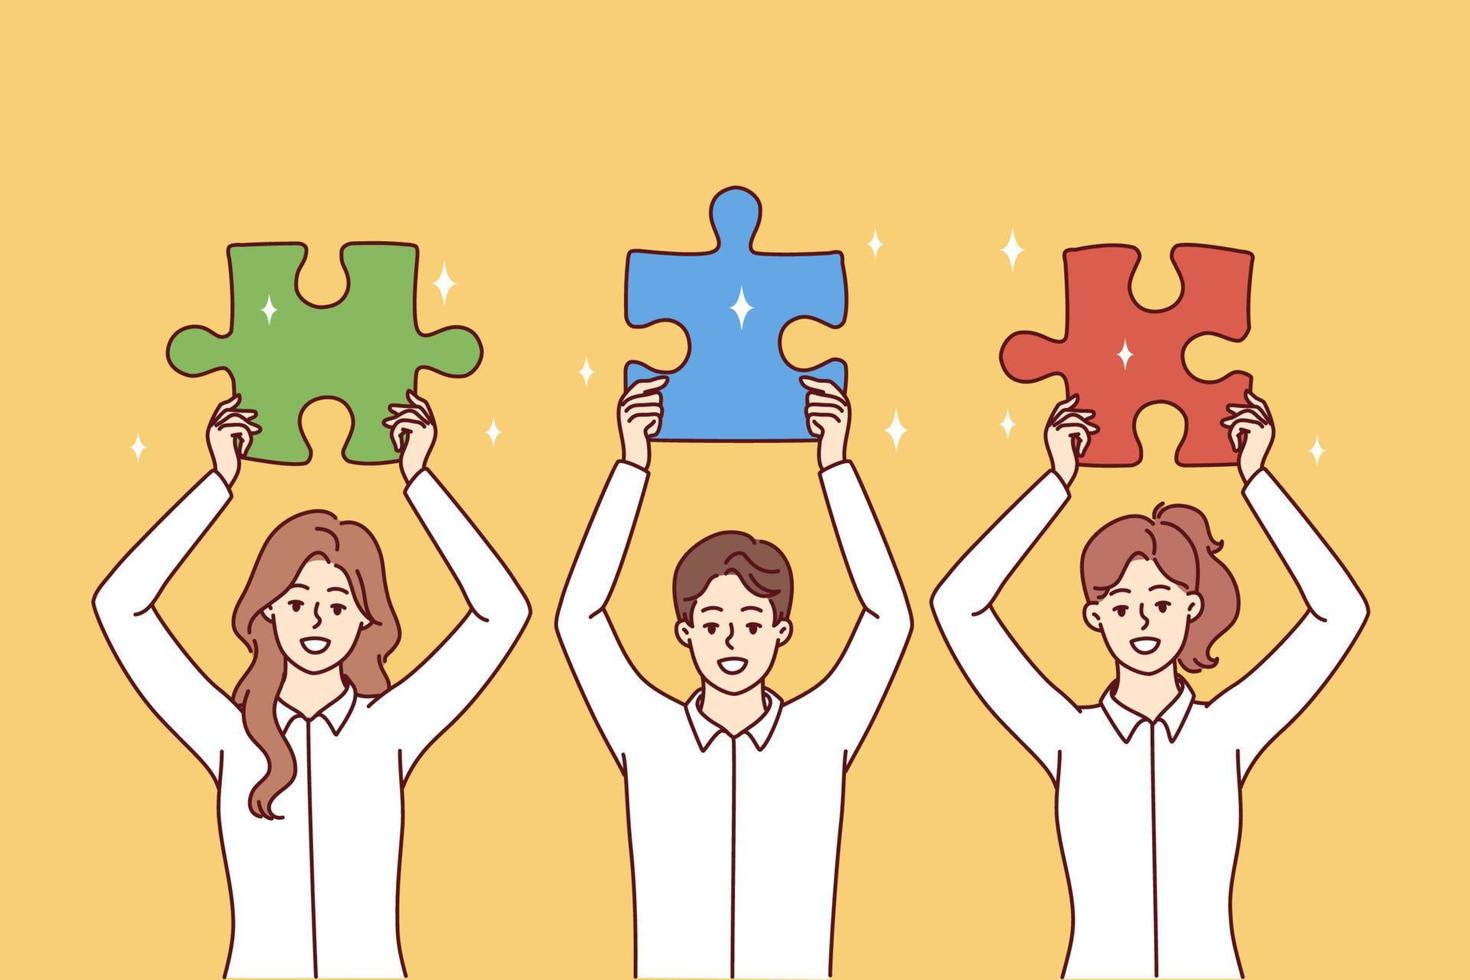 Employees demonstrate jigsaw puzzles to show team work and joint desire to make company better. Man and woman working in same startup jointly contribute to success of corporation. Flat vector image